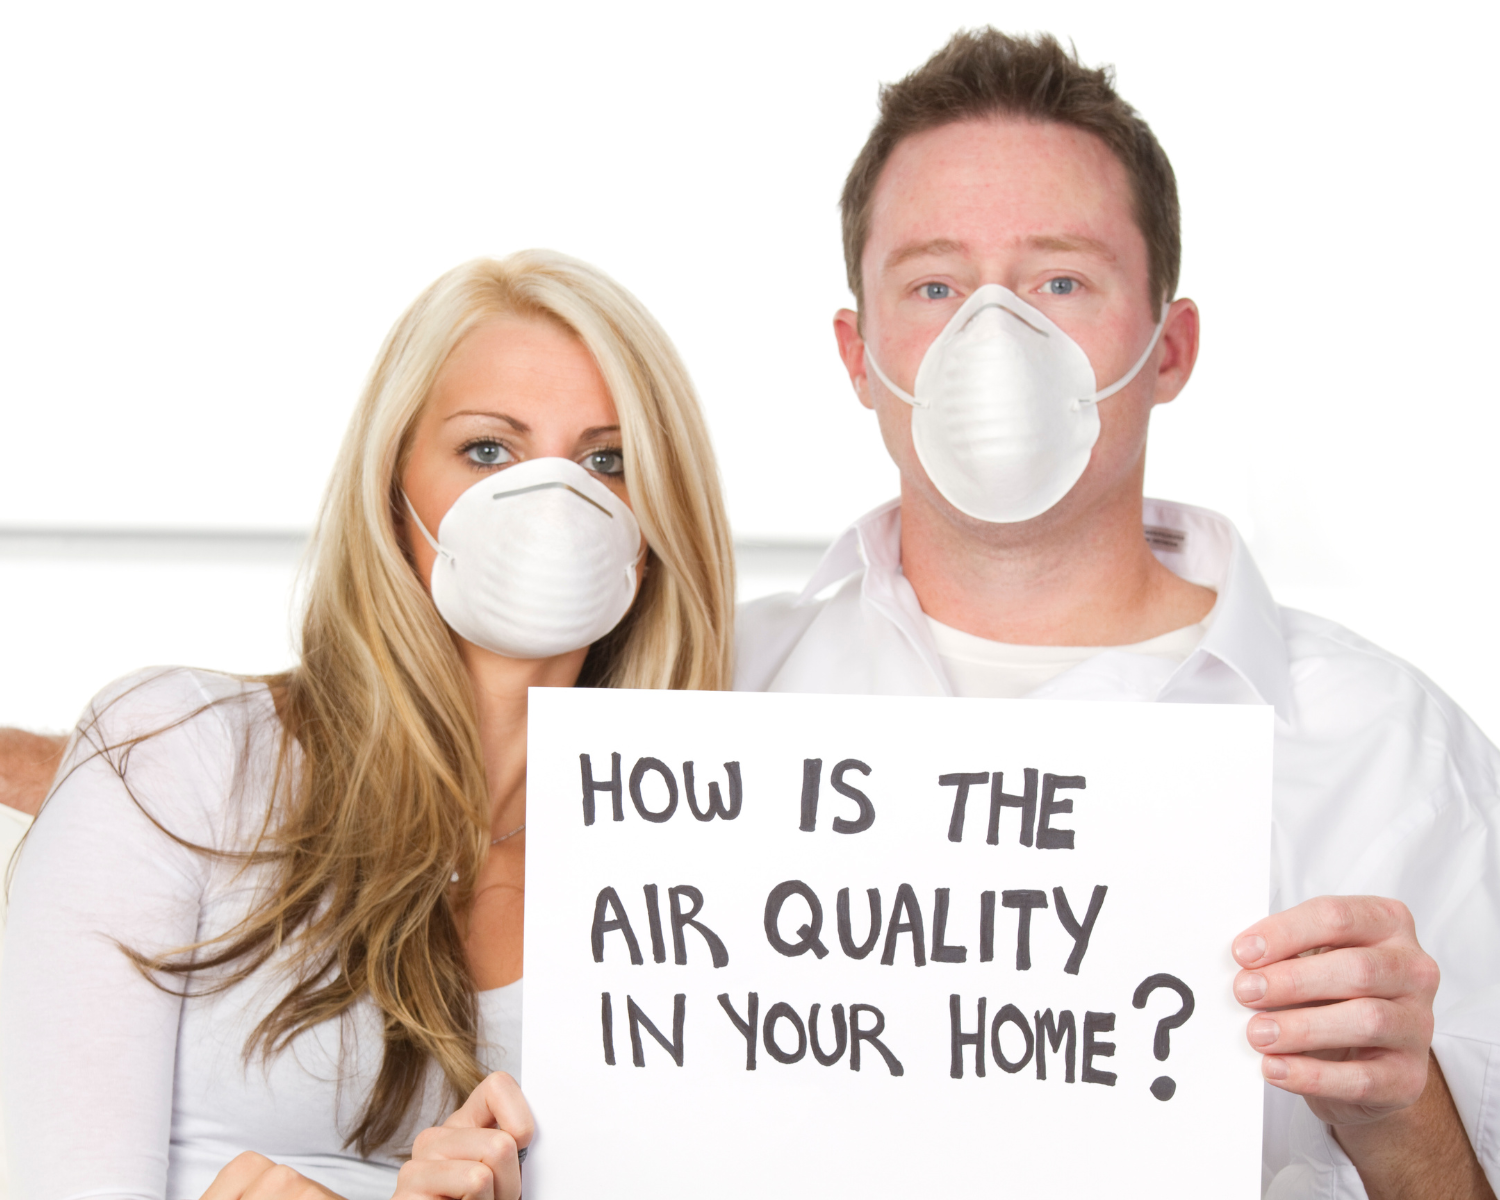 International guidelines and indoor air quality standards